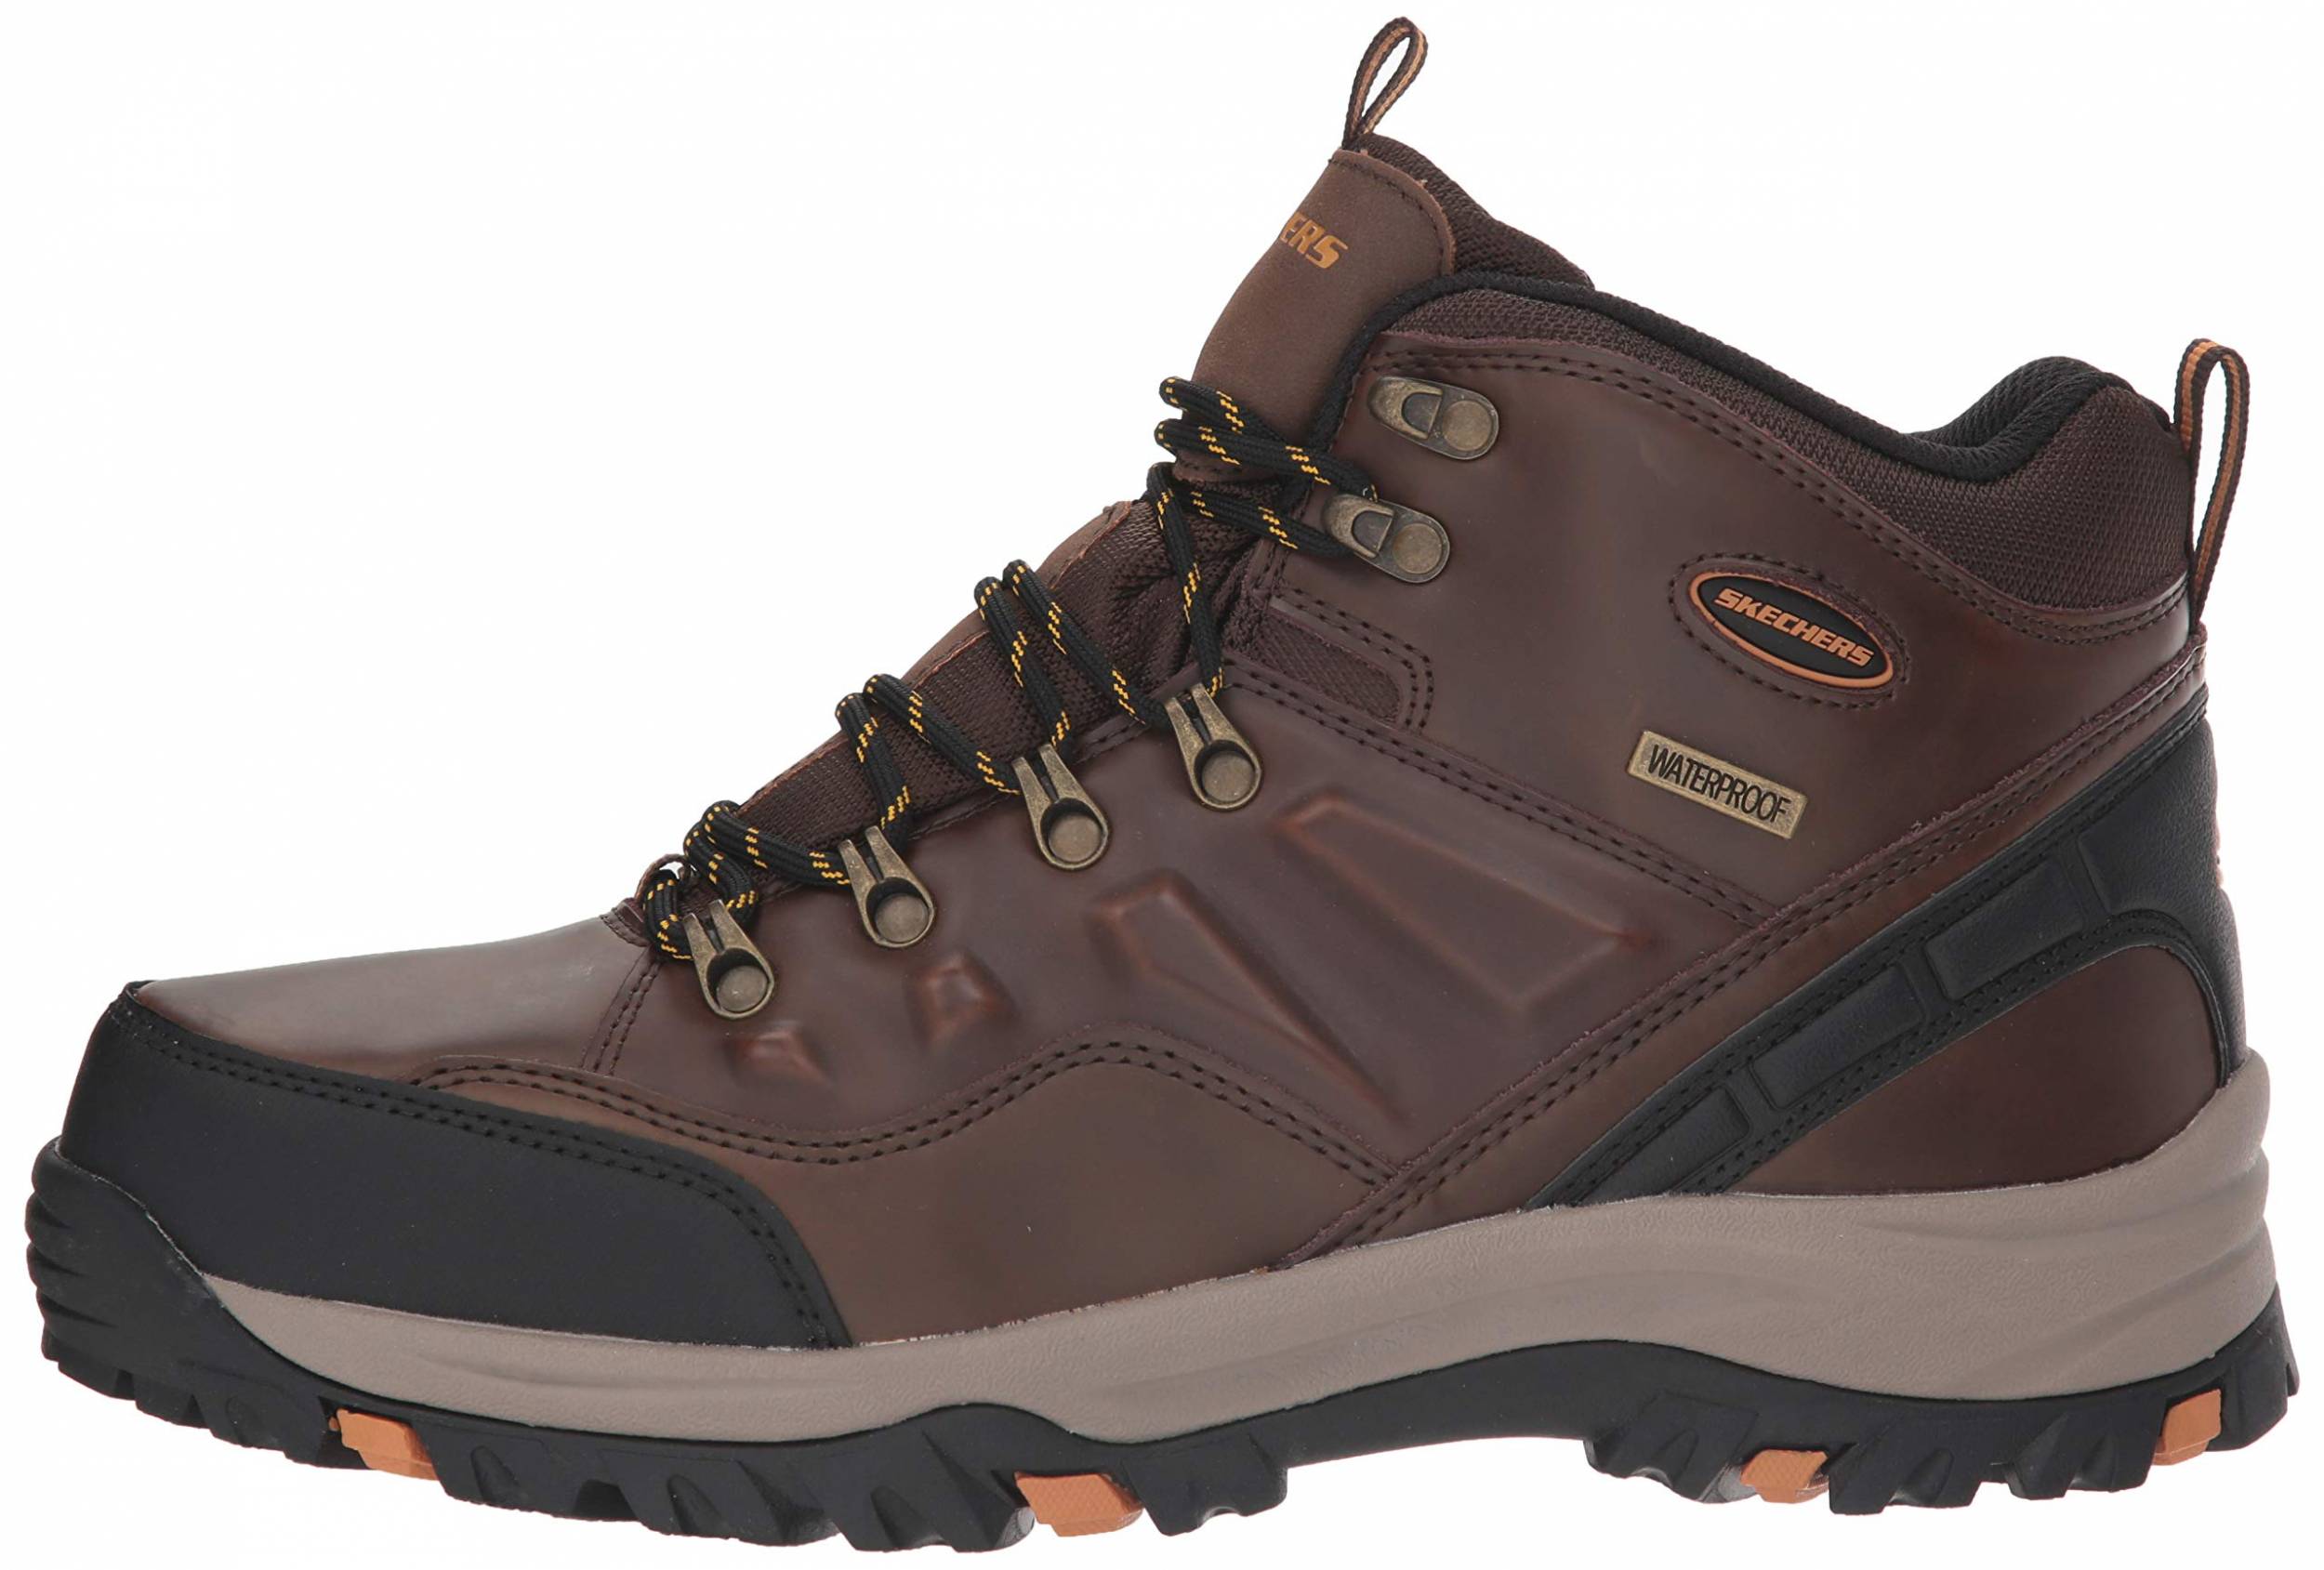 Save 28% on Cheap Hiking Boots (54 